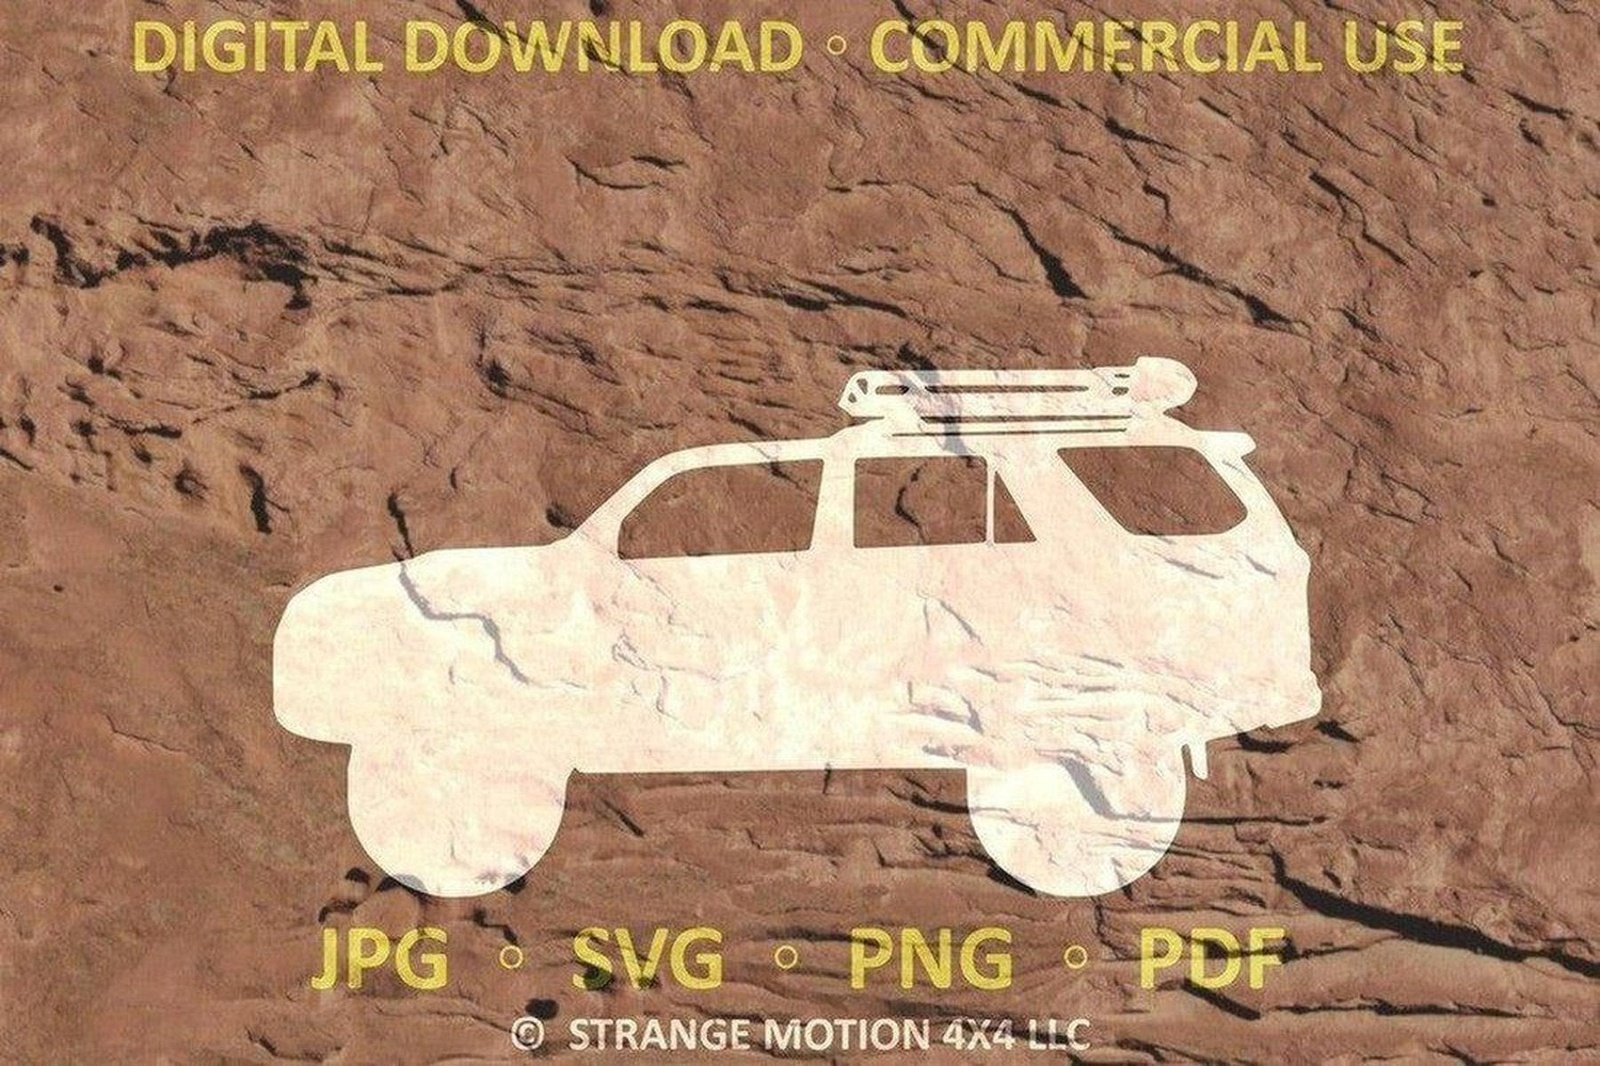 5th Gen Silhouette File Pack for 4Runner - Commercial Use